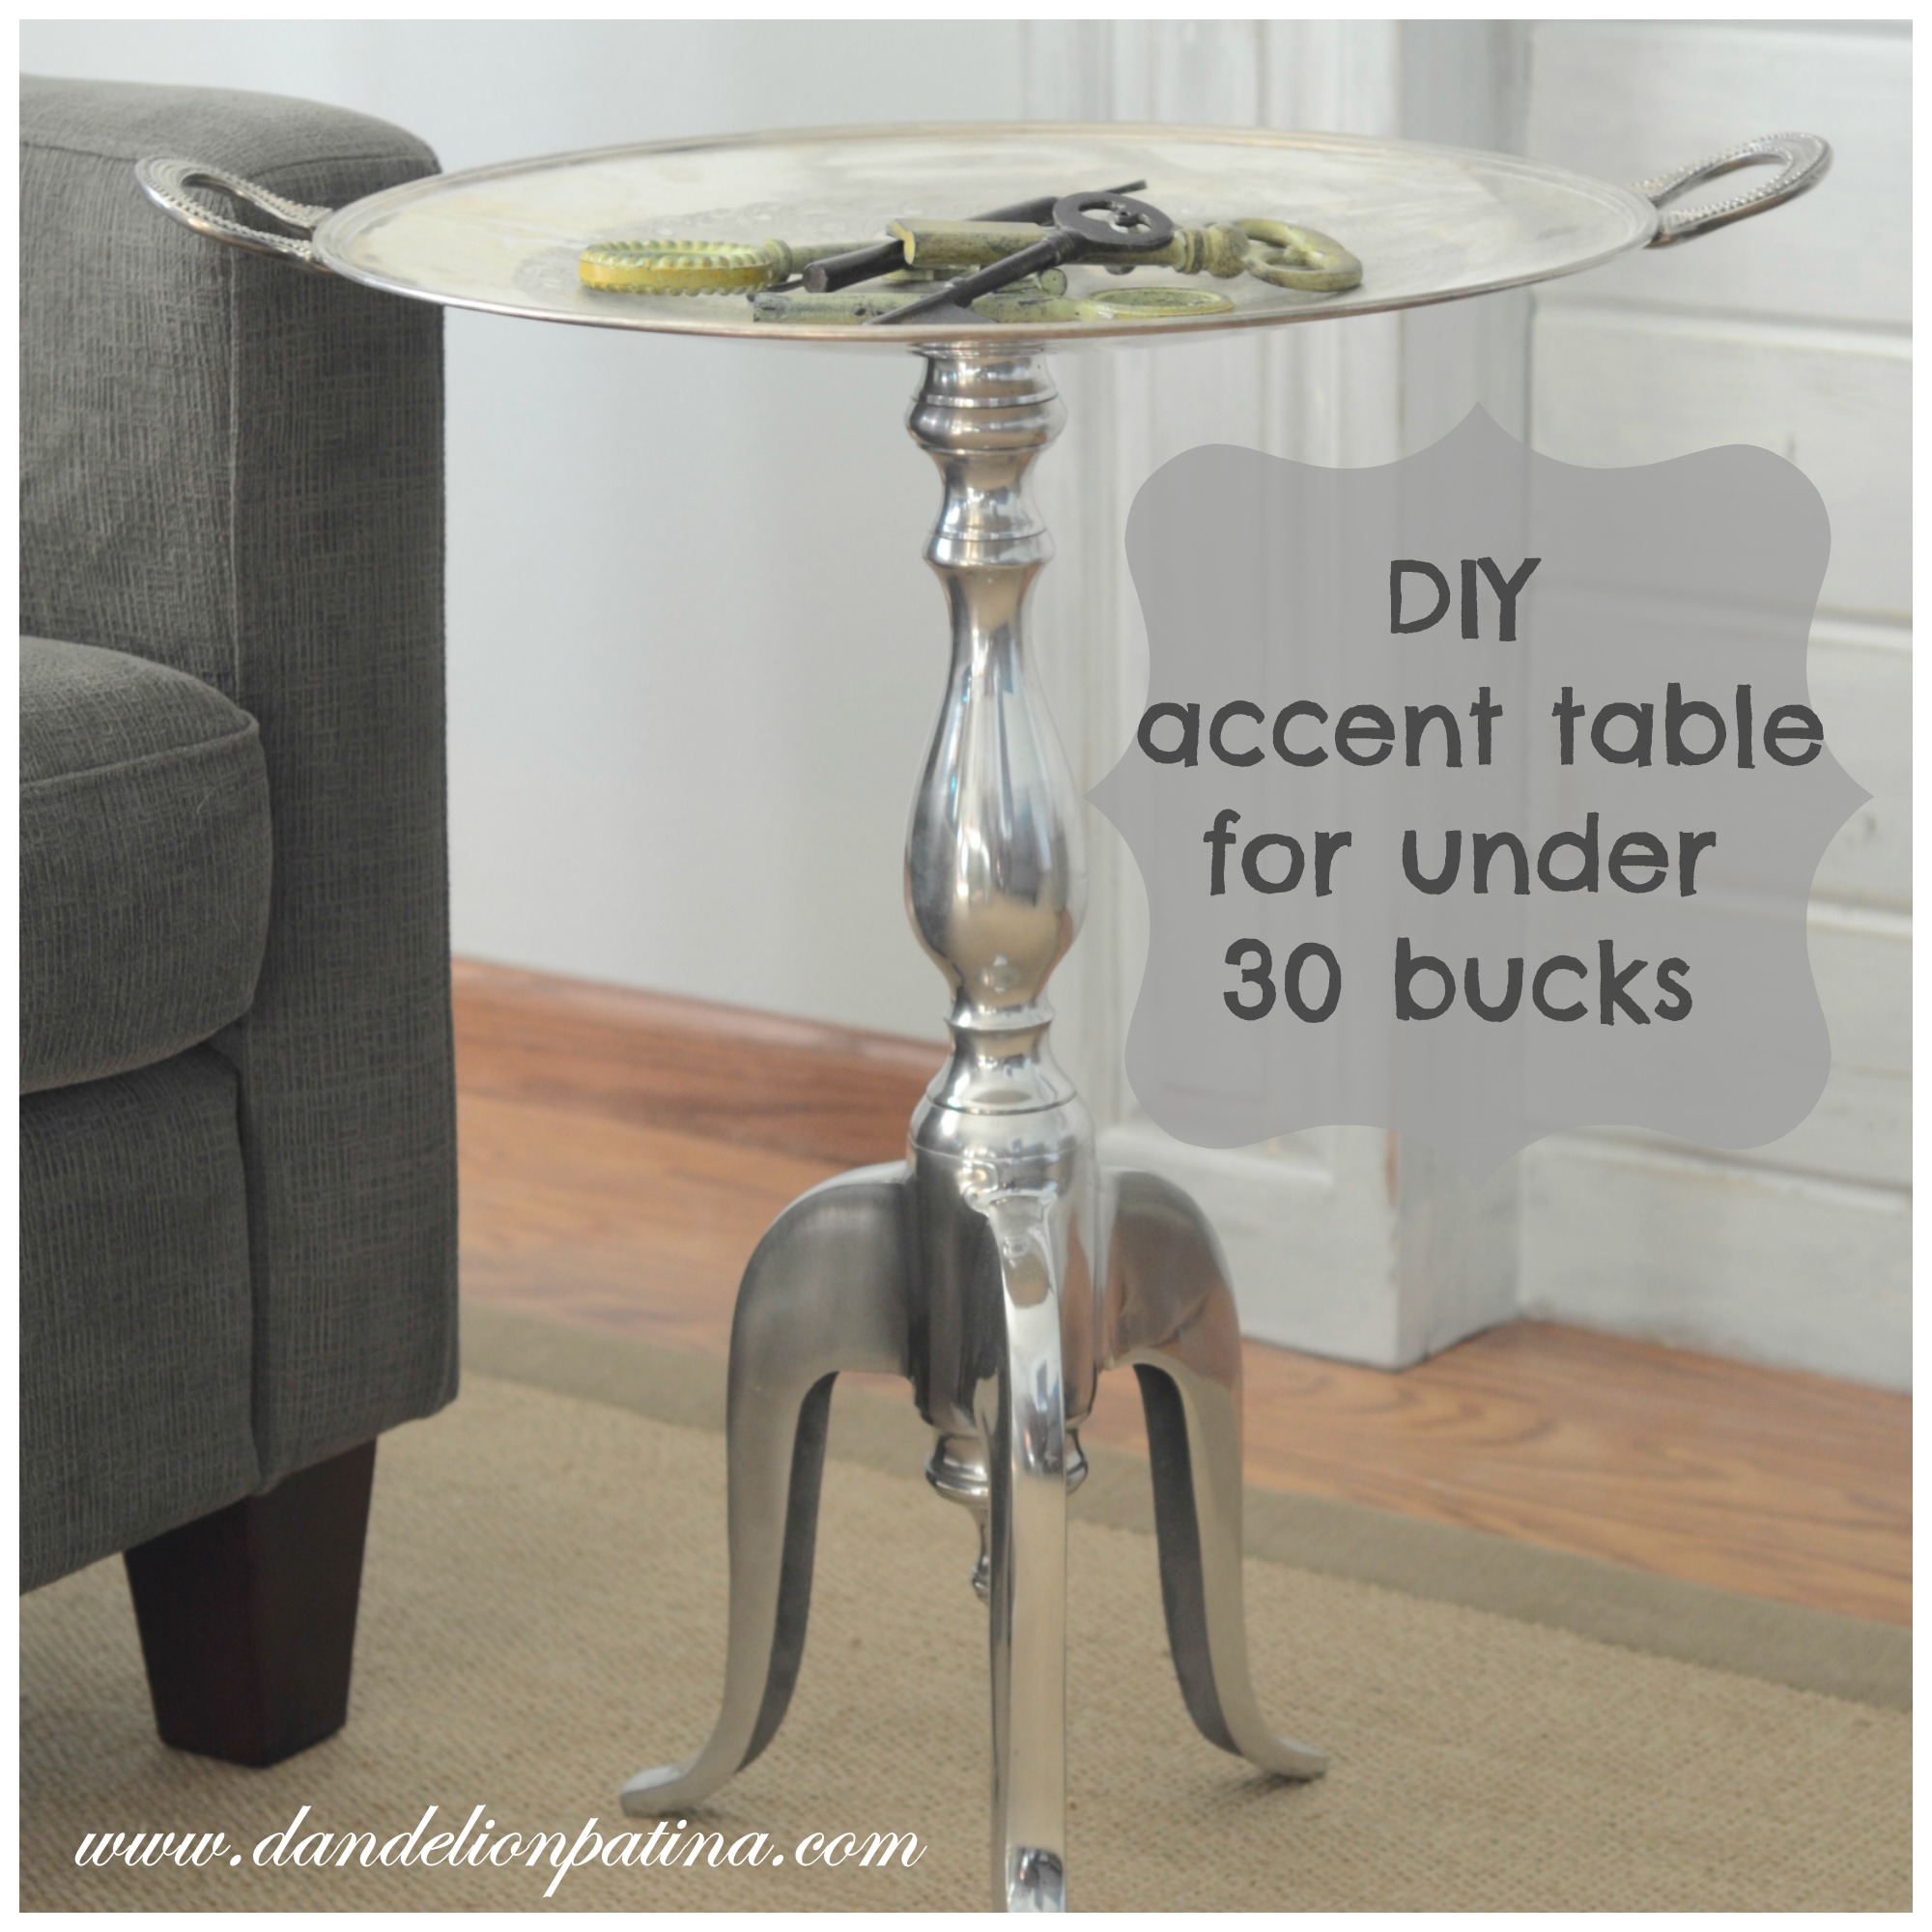 diy metal accent table dandelion patina bucks tray lime green coffee small tall turquoise pieces christmas tablecloth and runner sets bistro chairs indoor low console cabinet pier